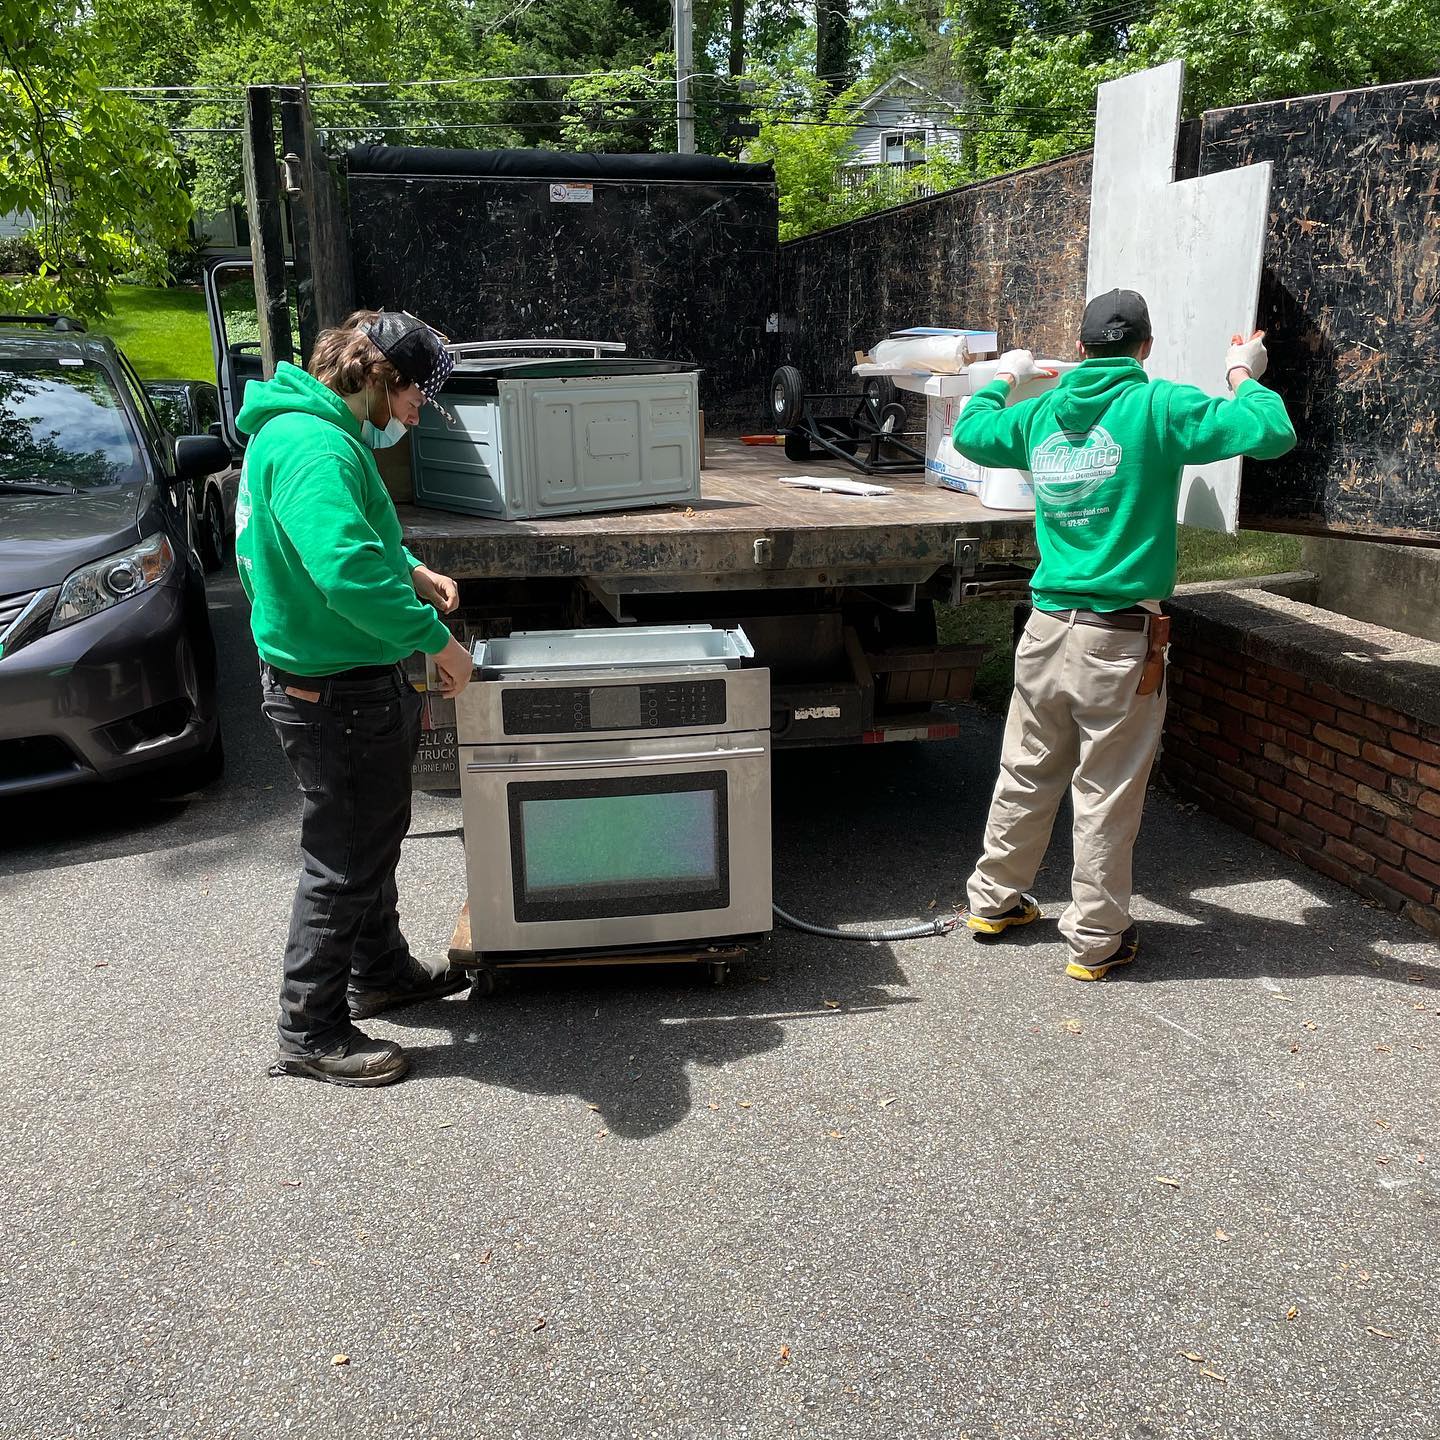 Junk Force employees haul old appliances and boxes into truck